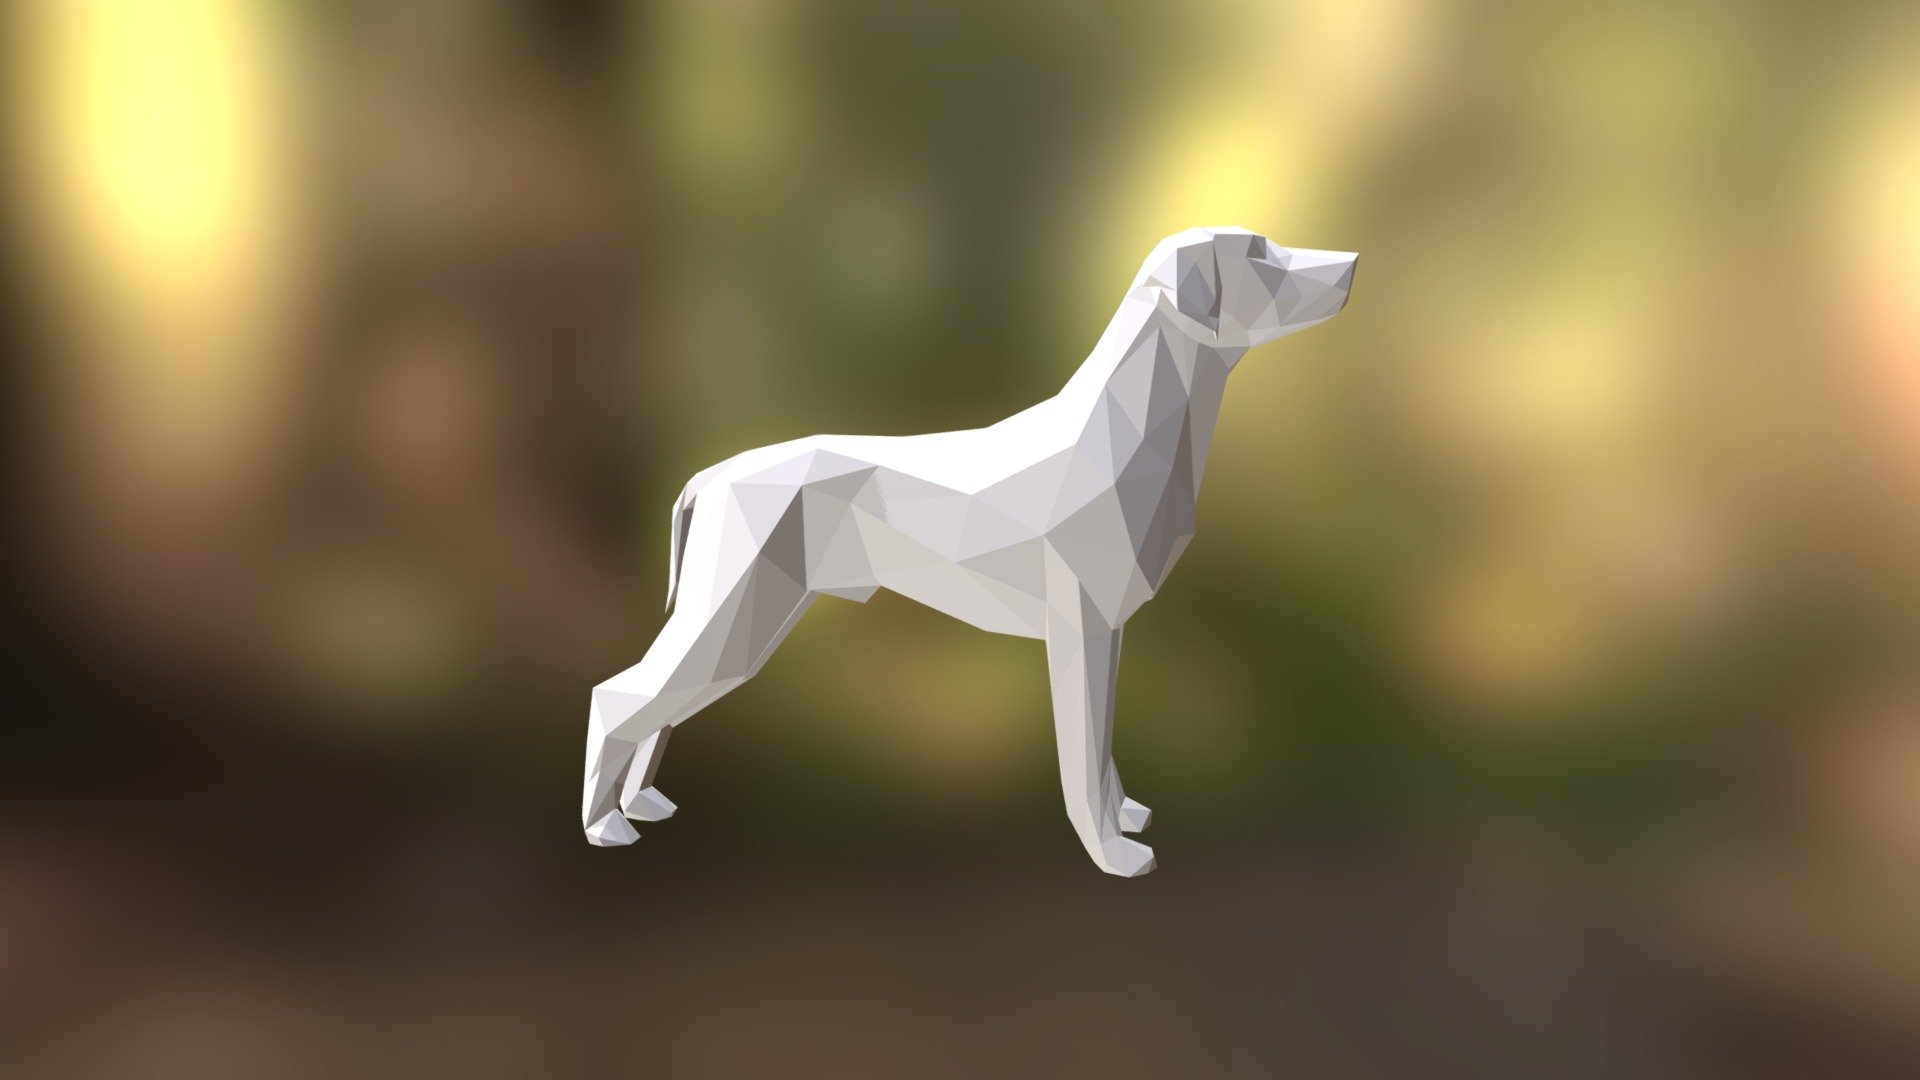 Dog low poly model for 3D printing.